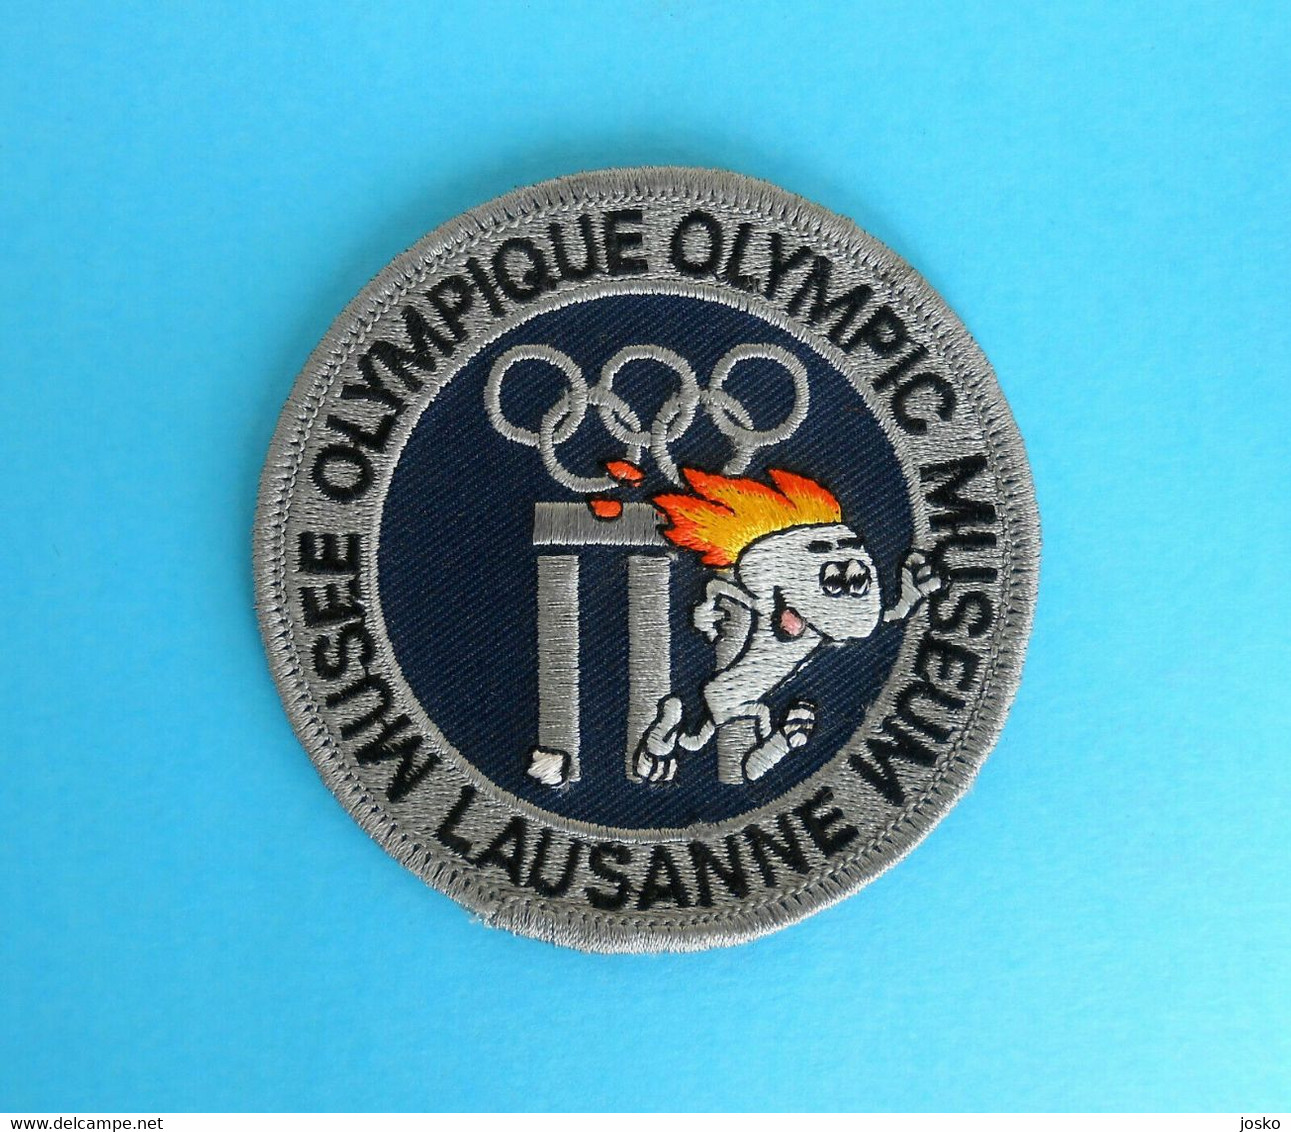 OLYMPIC MUSEUM LAUSANNE Nice Patch * Olympic Games Olympia Olympiade Olimpische Spiele Giochi Olimpici Juegos Olímpicos - Habillement, Souvenirs & Autres